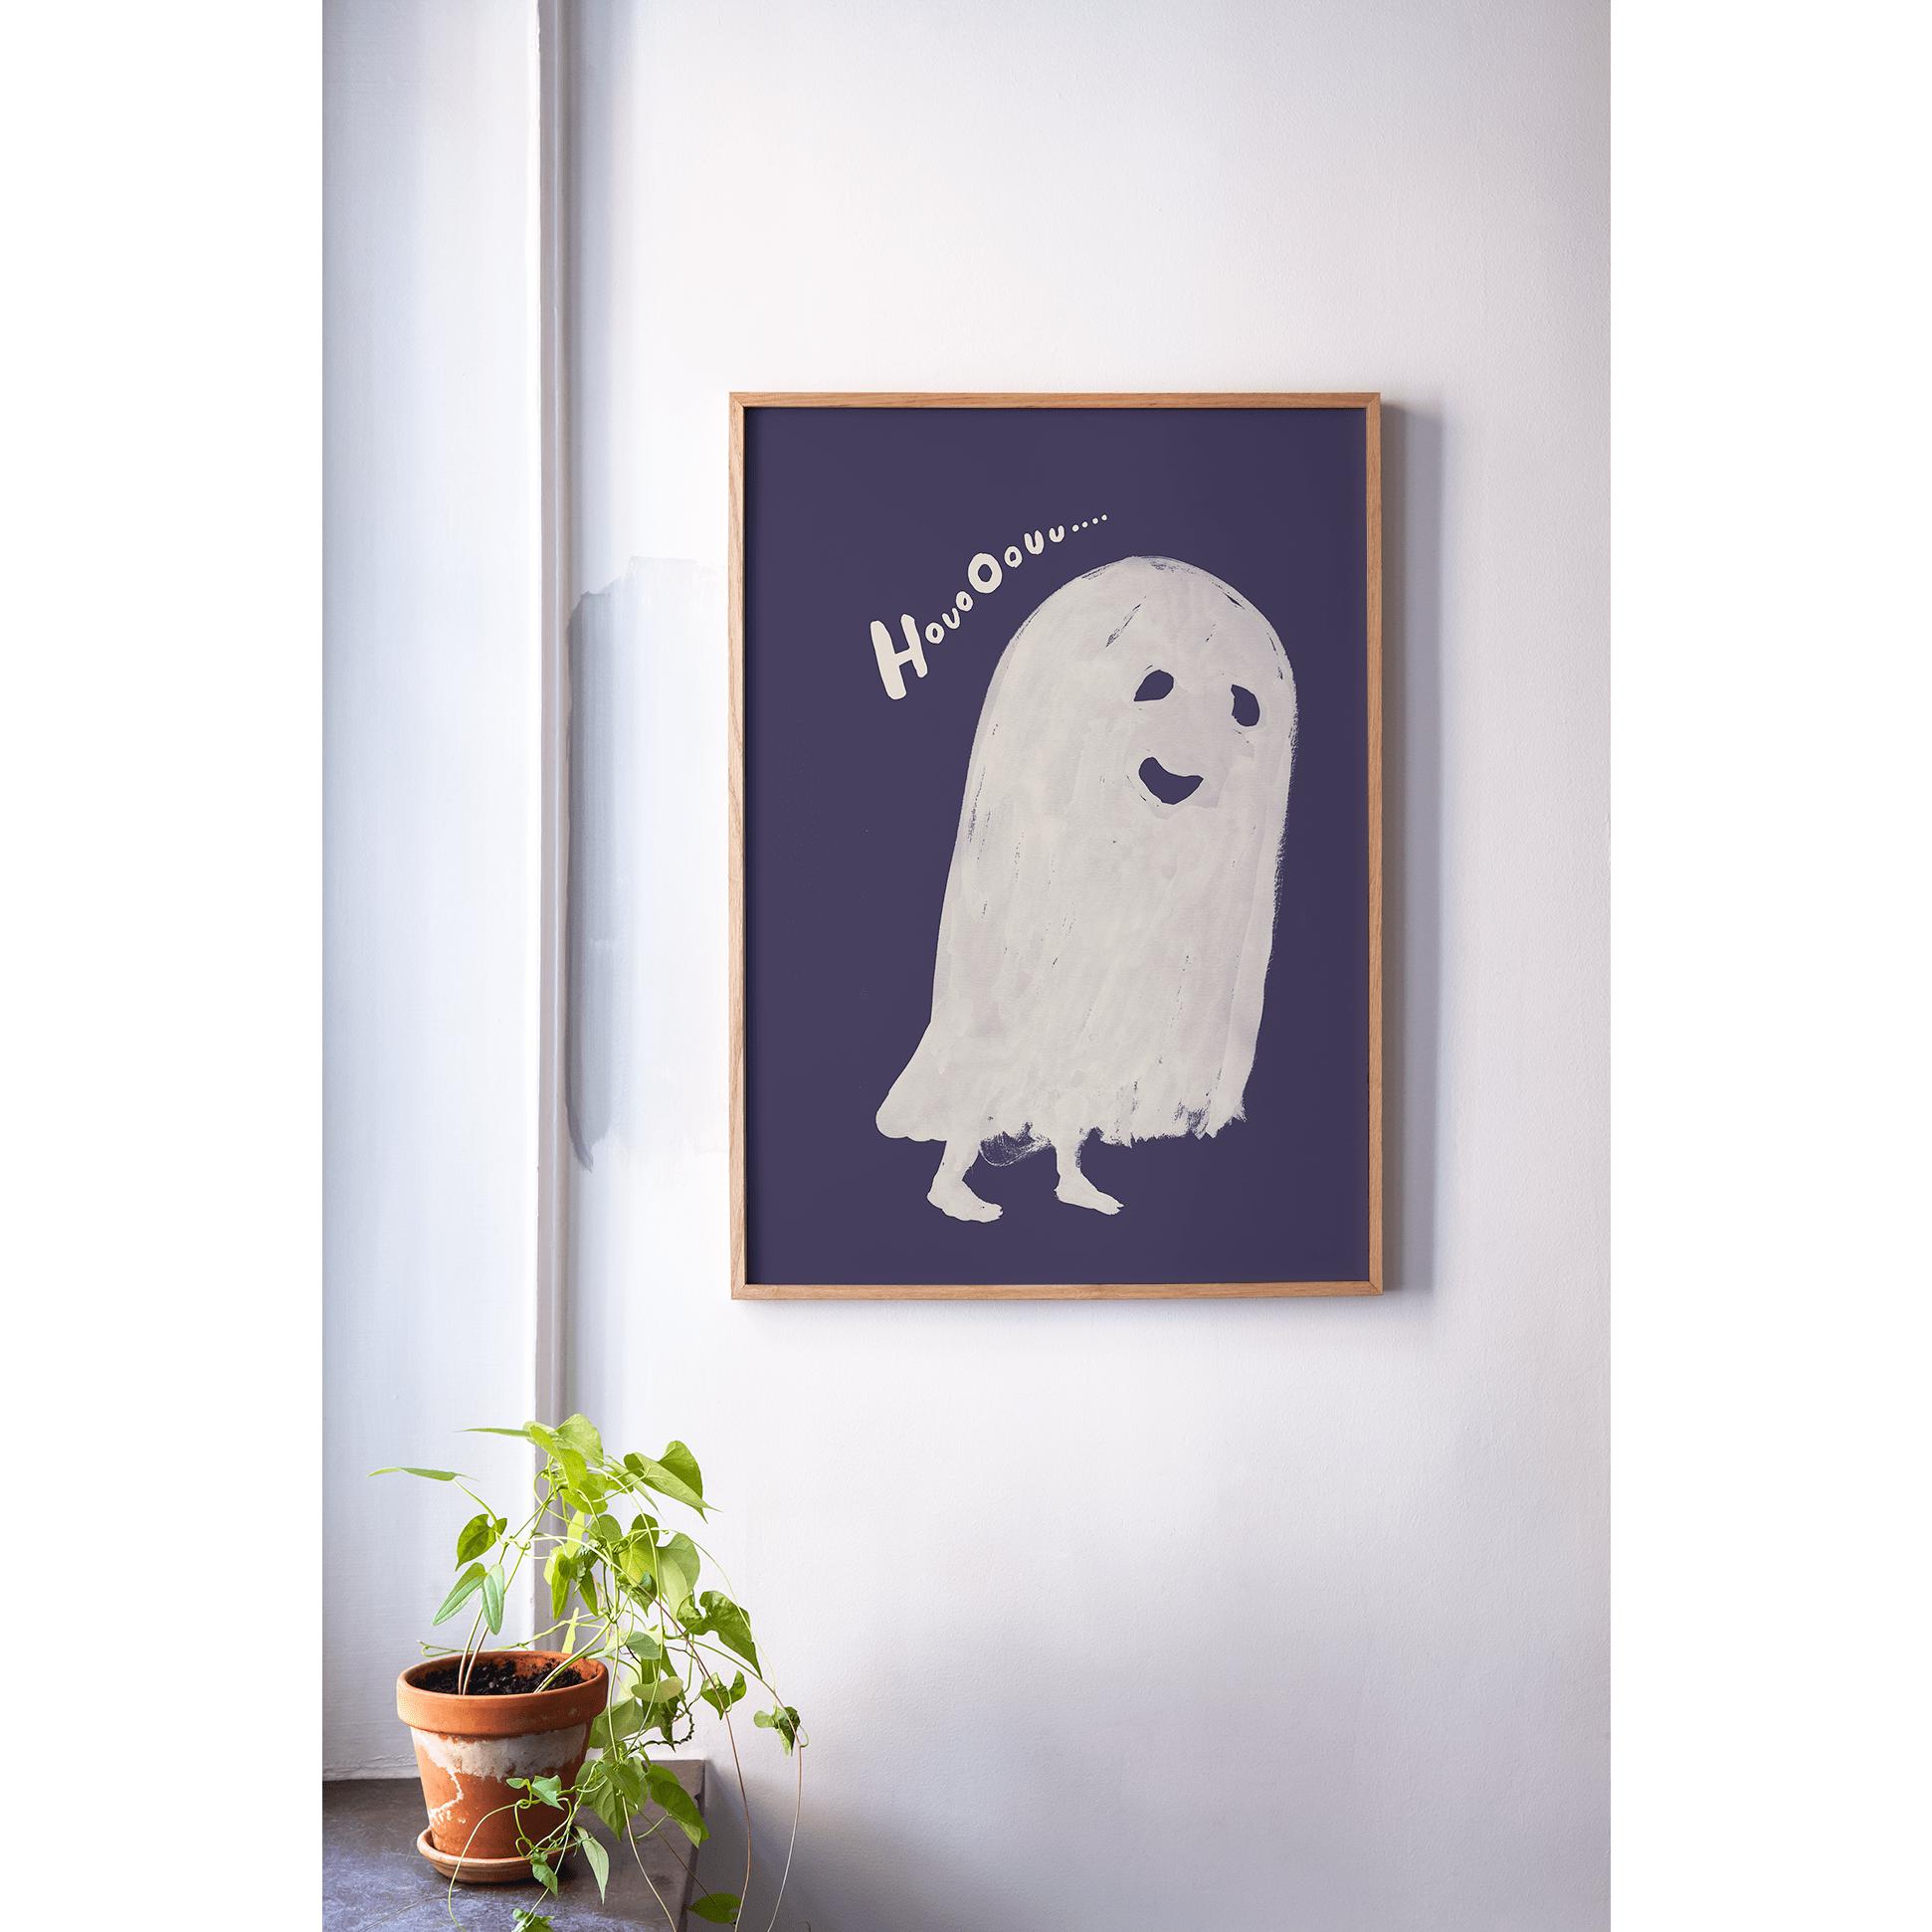 Paper Collective Houo Oouu Poster 50x70 Cm, White